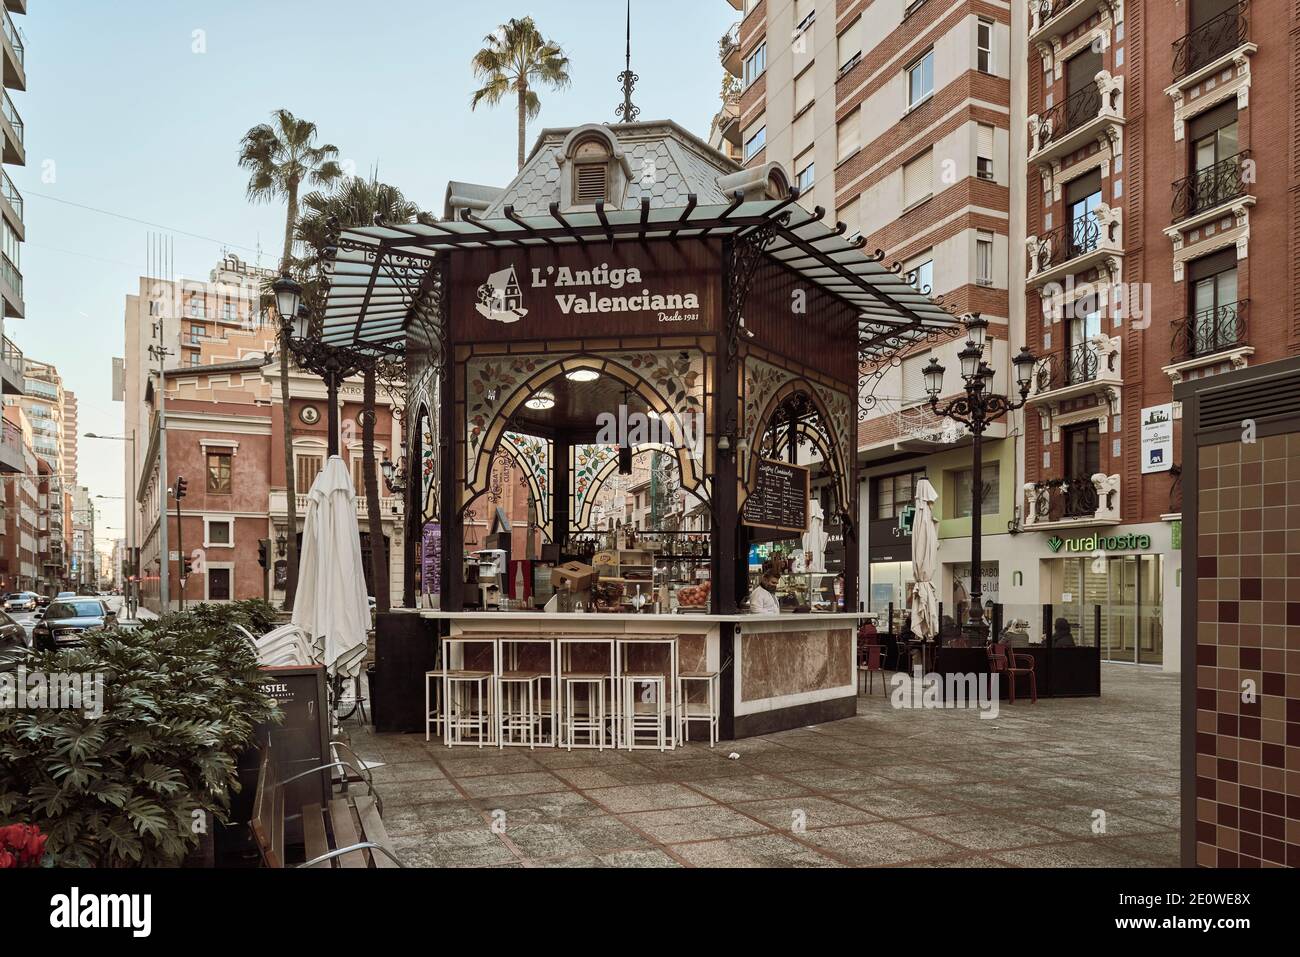 L’Antiga Valenciana SL manages the modernist kiosk located in front of the Principal Theater in the Plaza de la Paz in the city of Castellon, Spain Stock Photo